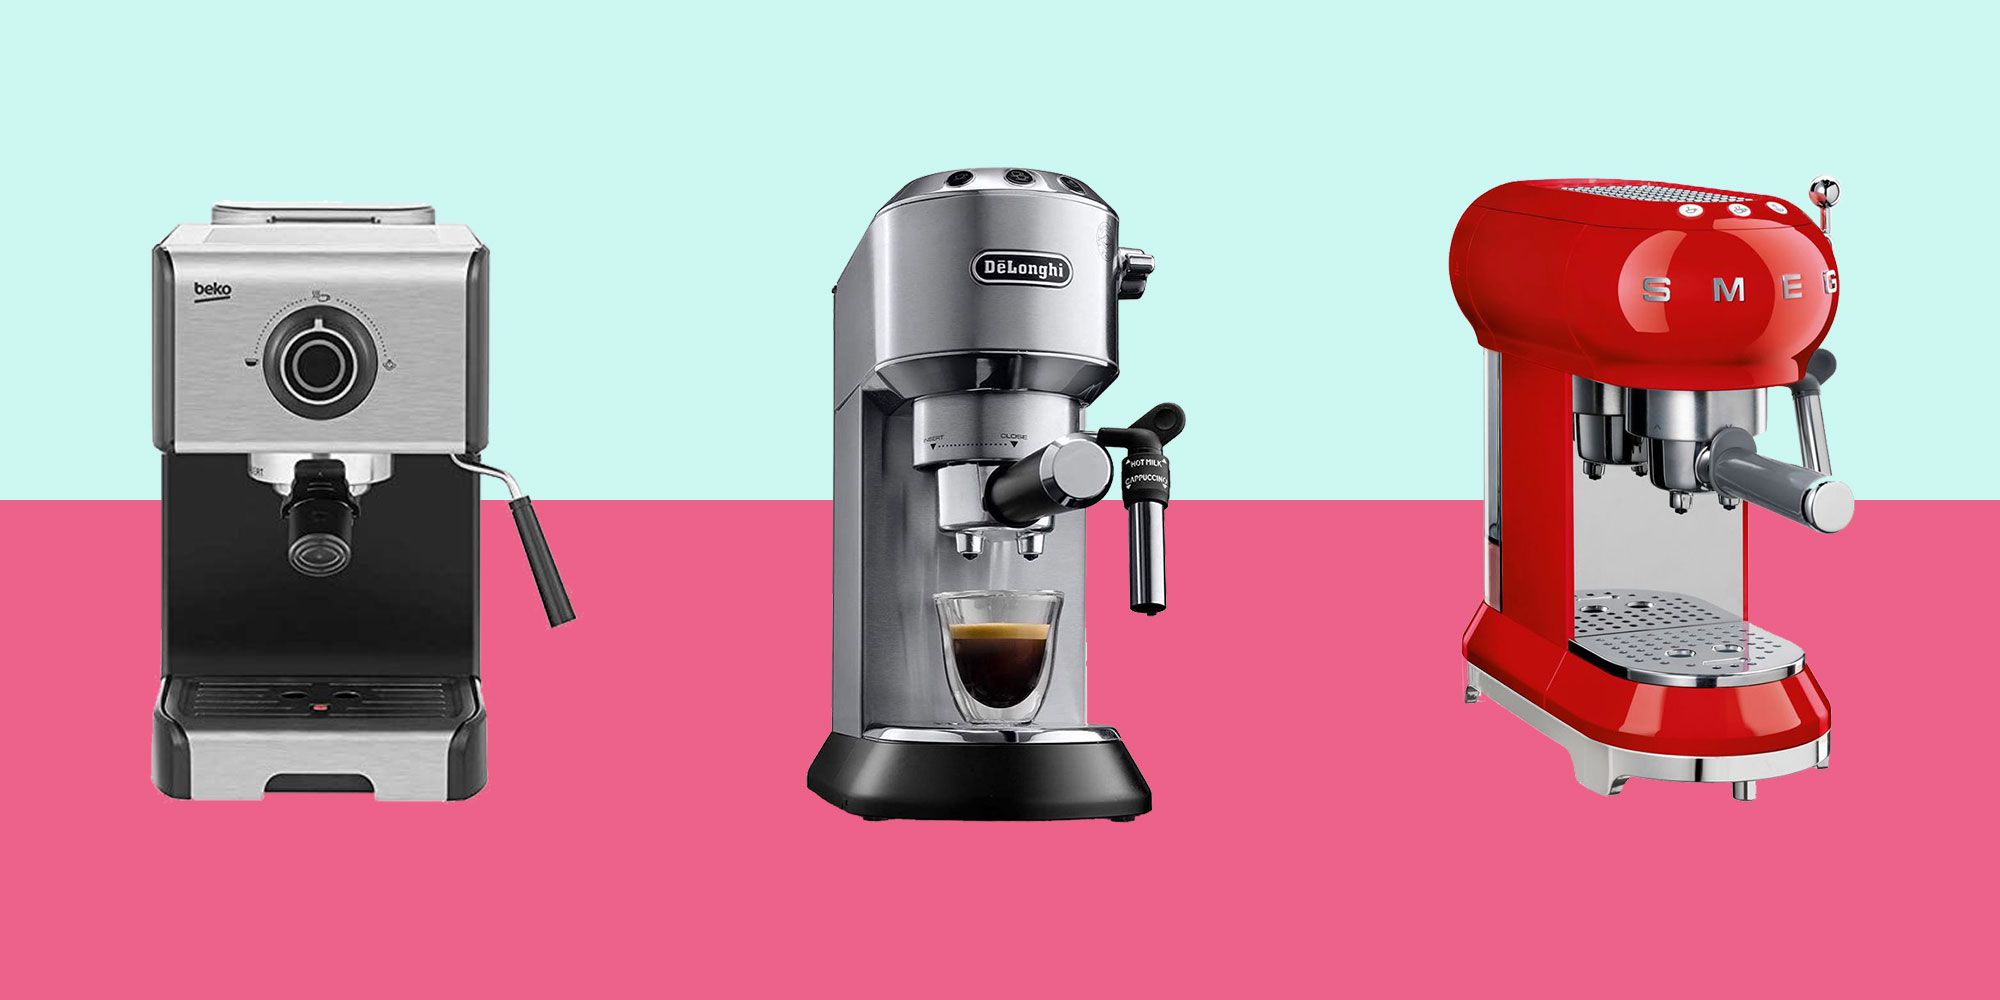 Best Espresso Coffee Machines For 2020 From Delonghi Krups And More,Green Hair Algae Aquarium